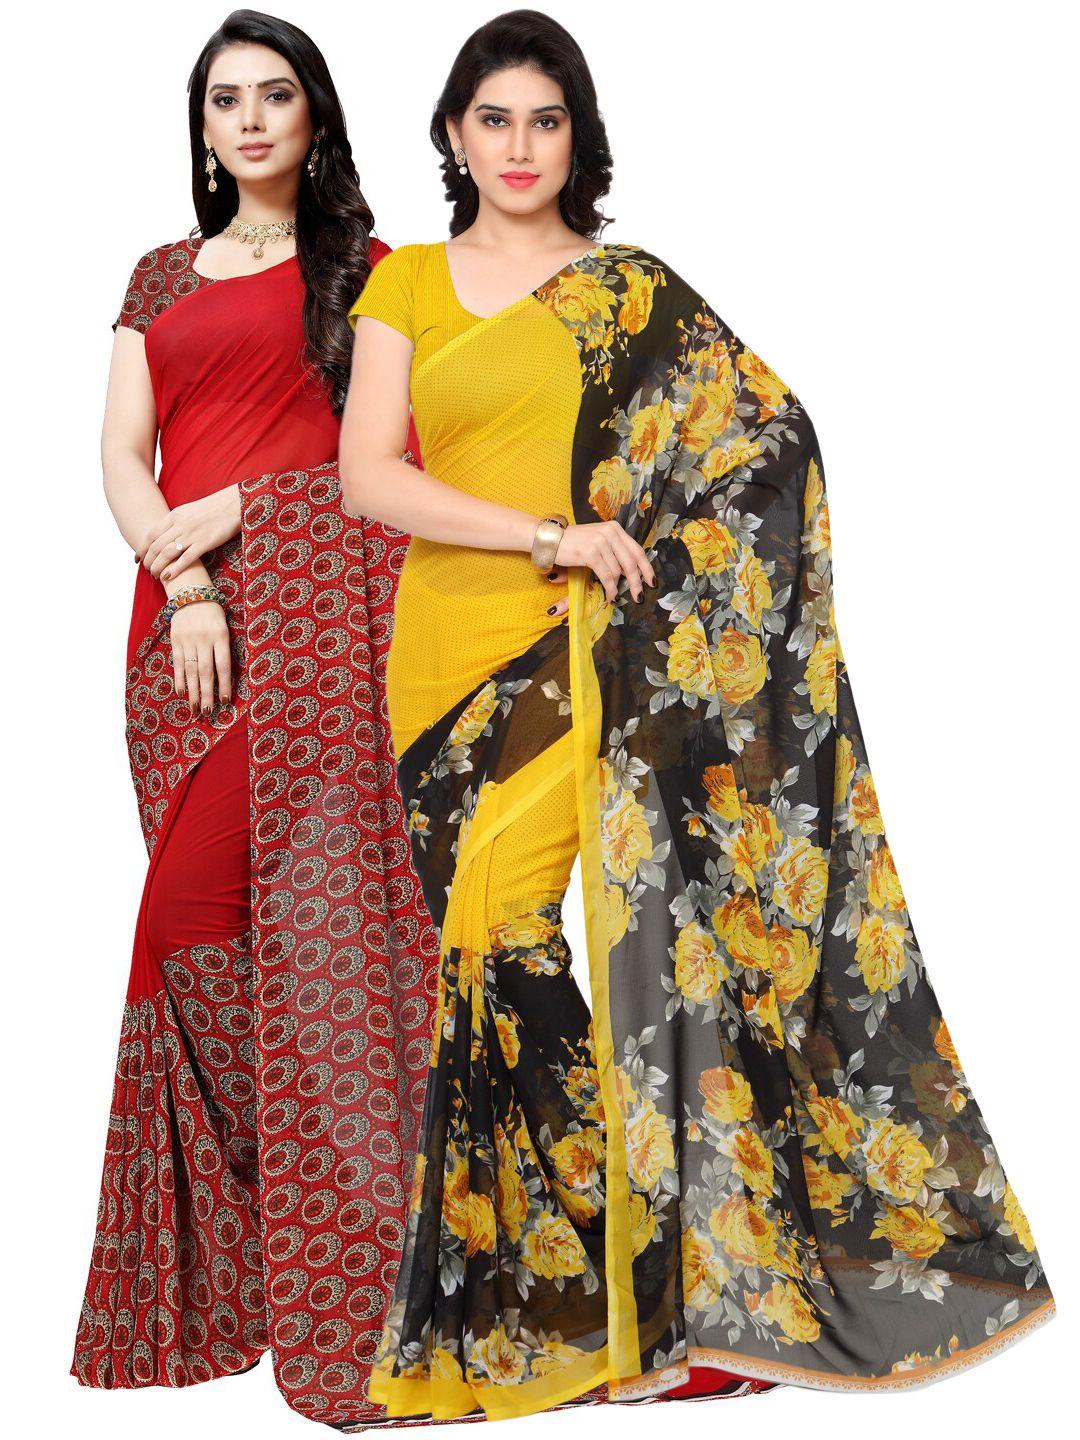 kalini pack of 2 yellow & maroon floral sarees